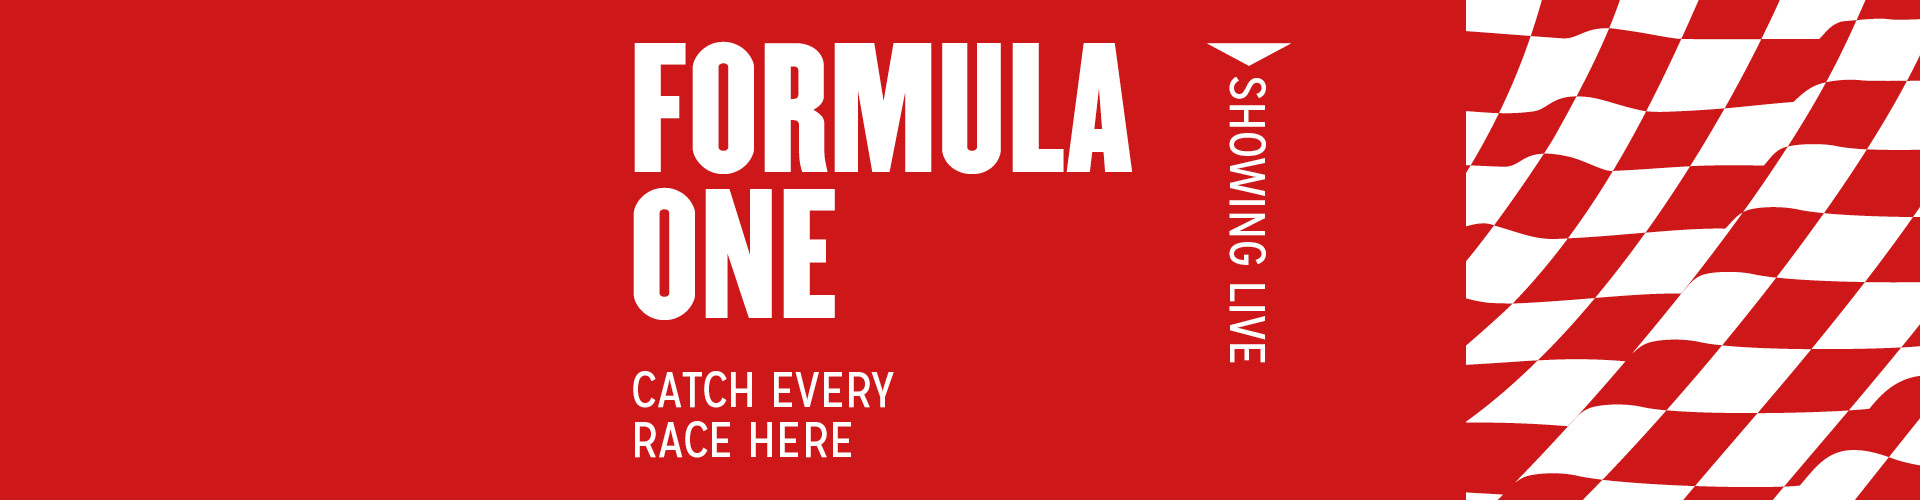 Formula One, Showing Live. Catch Every Race Here!